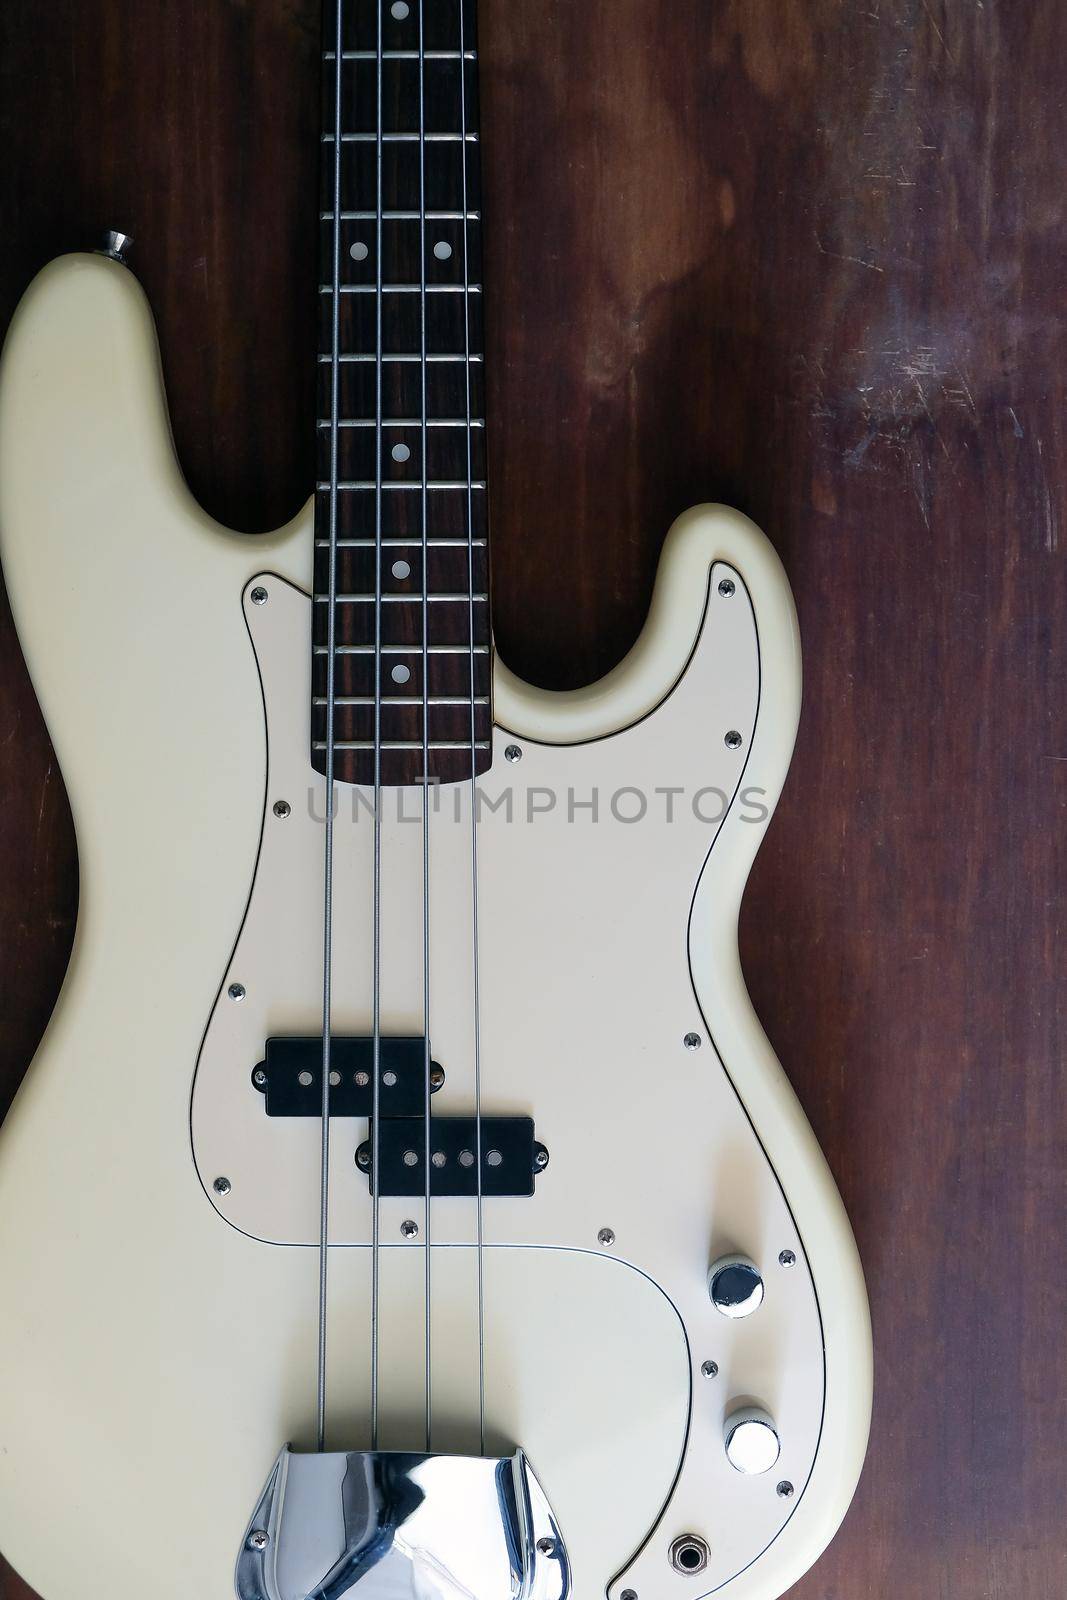 white electric bass guitar on wood background with copy space